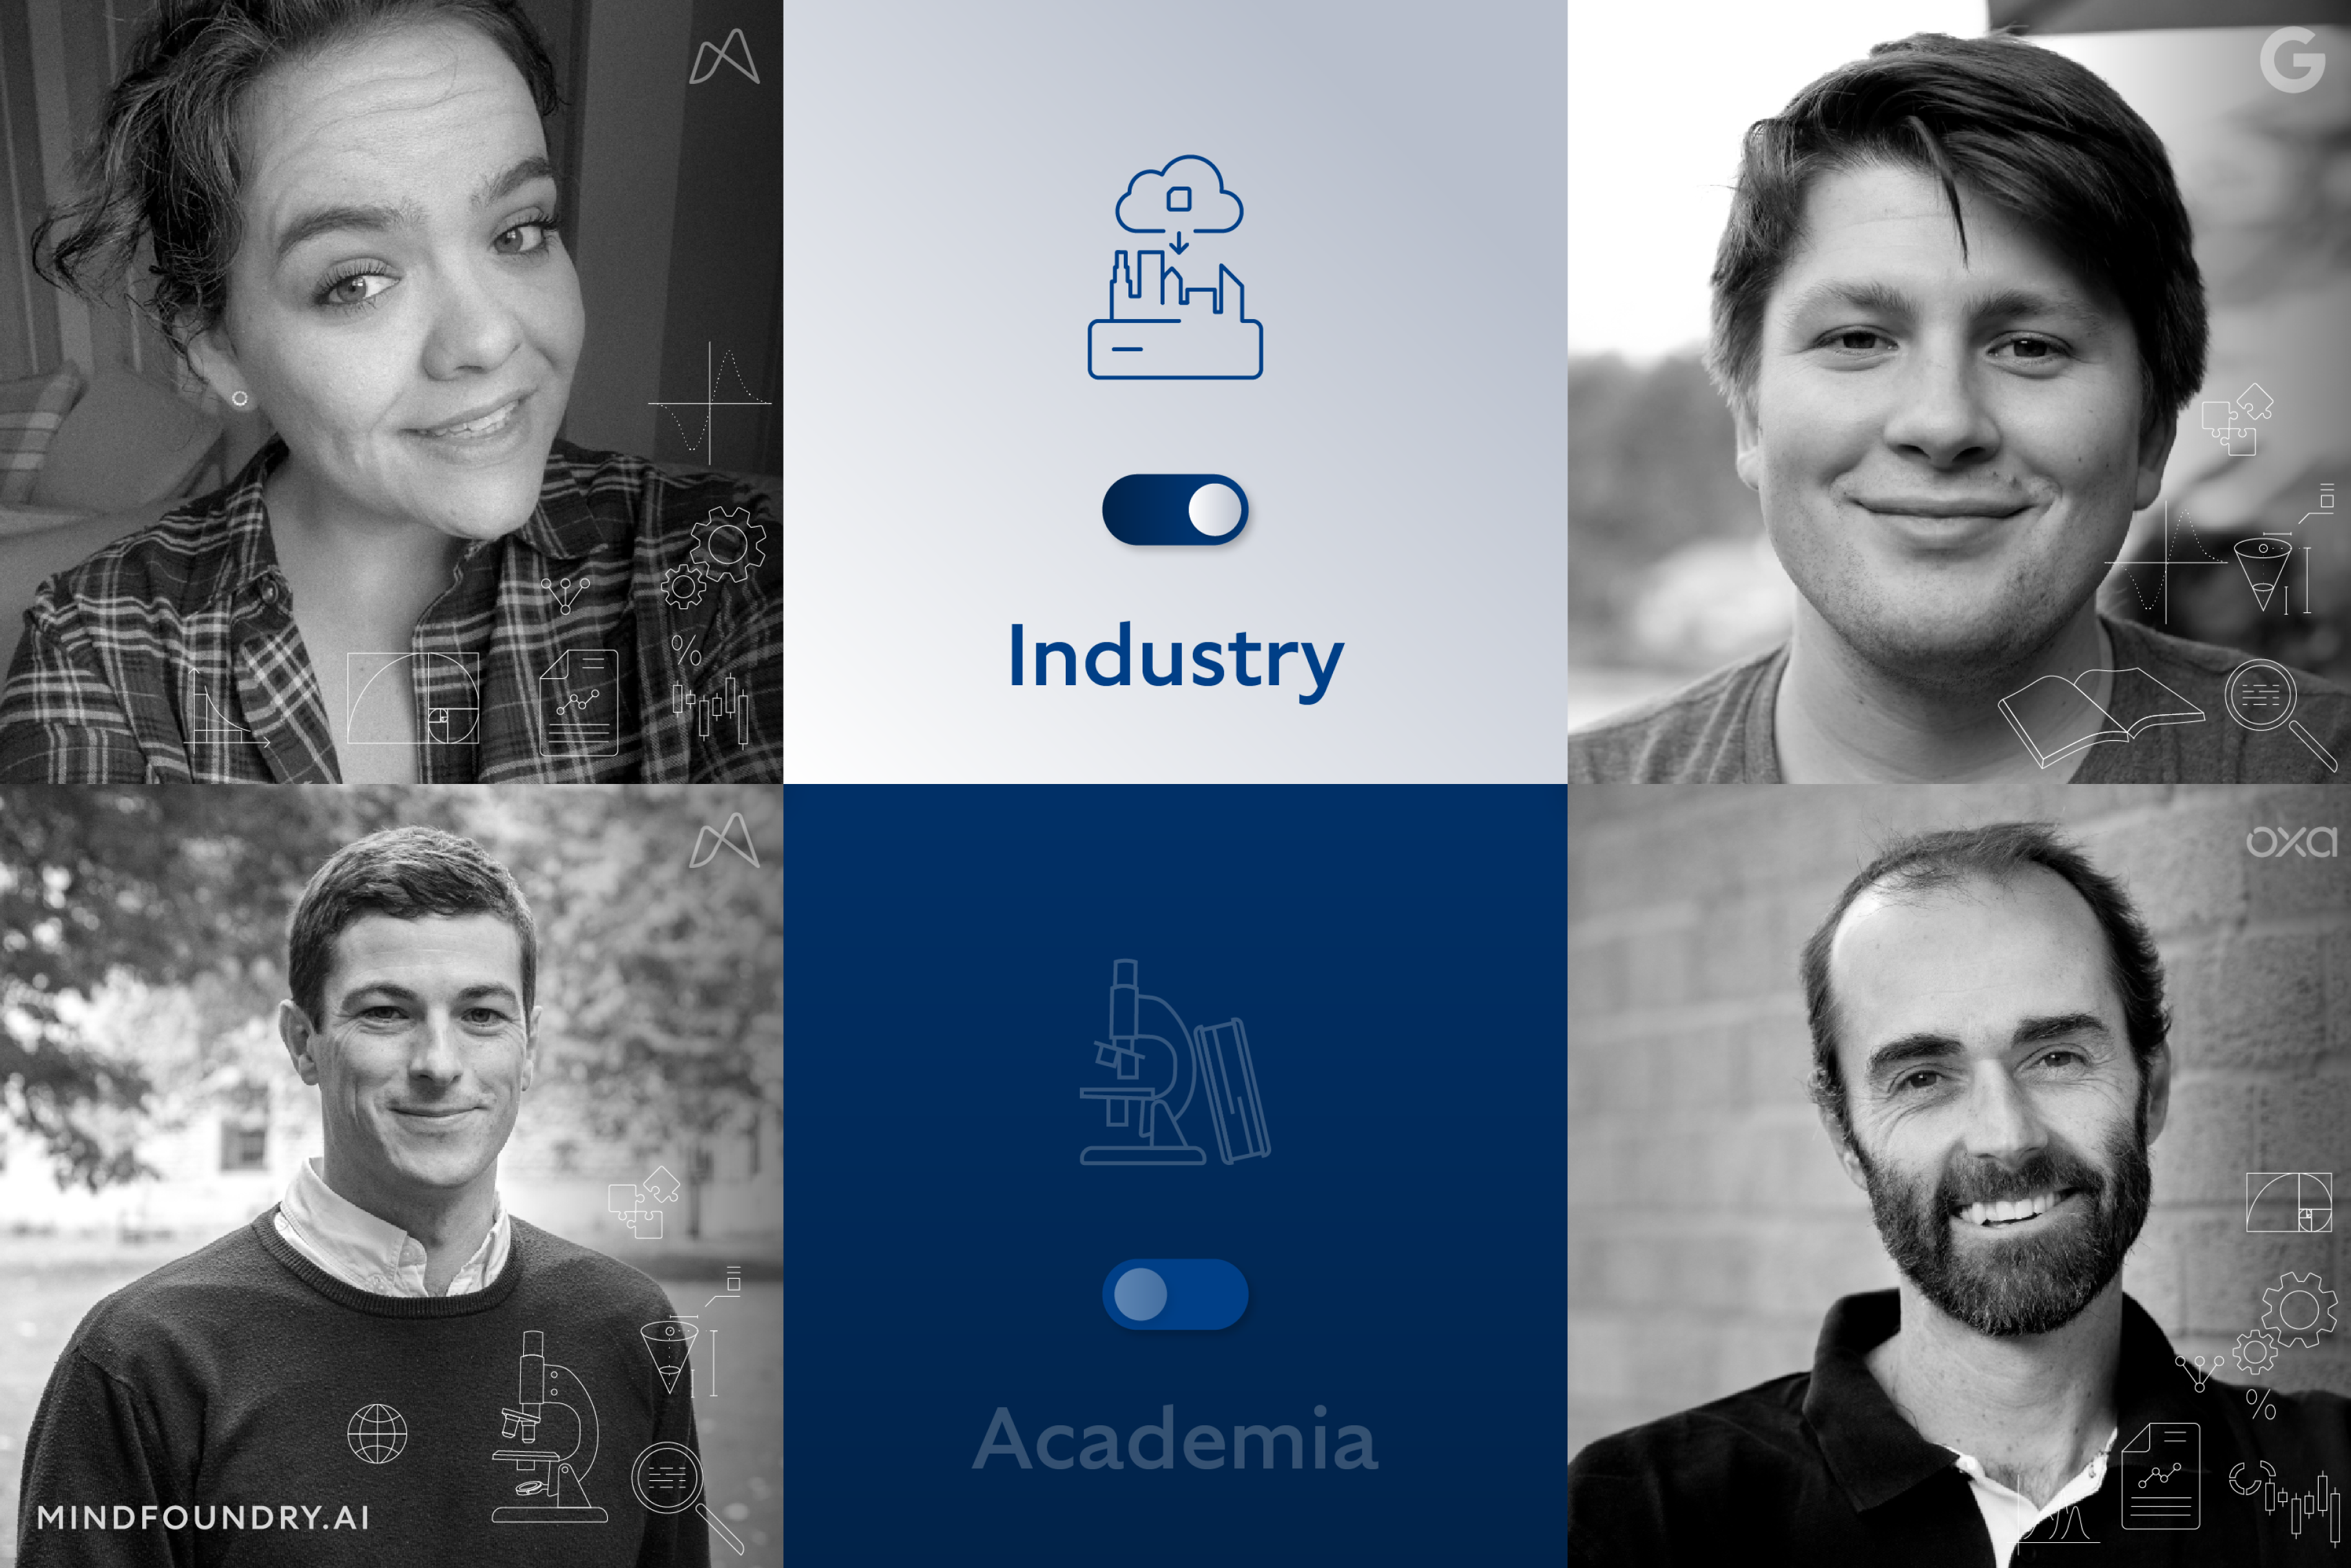 Academia to Industry: Going from Theory to Practice